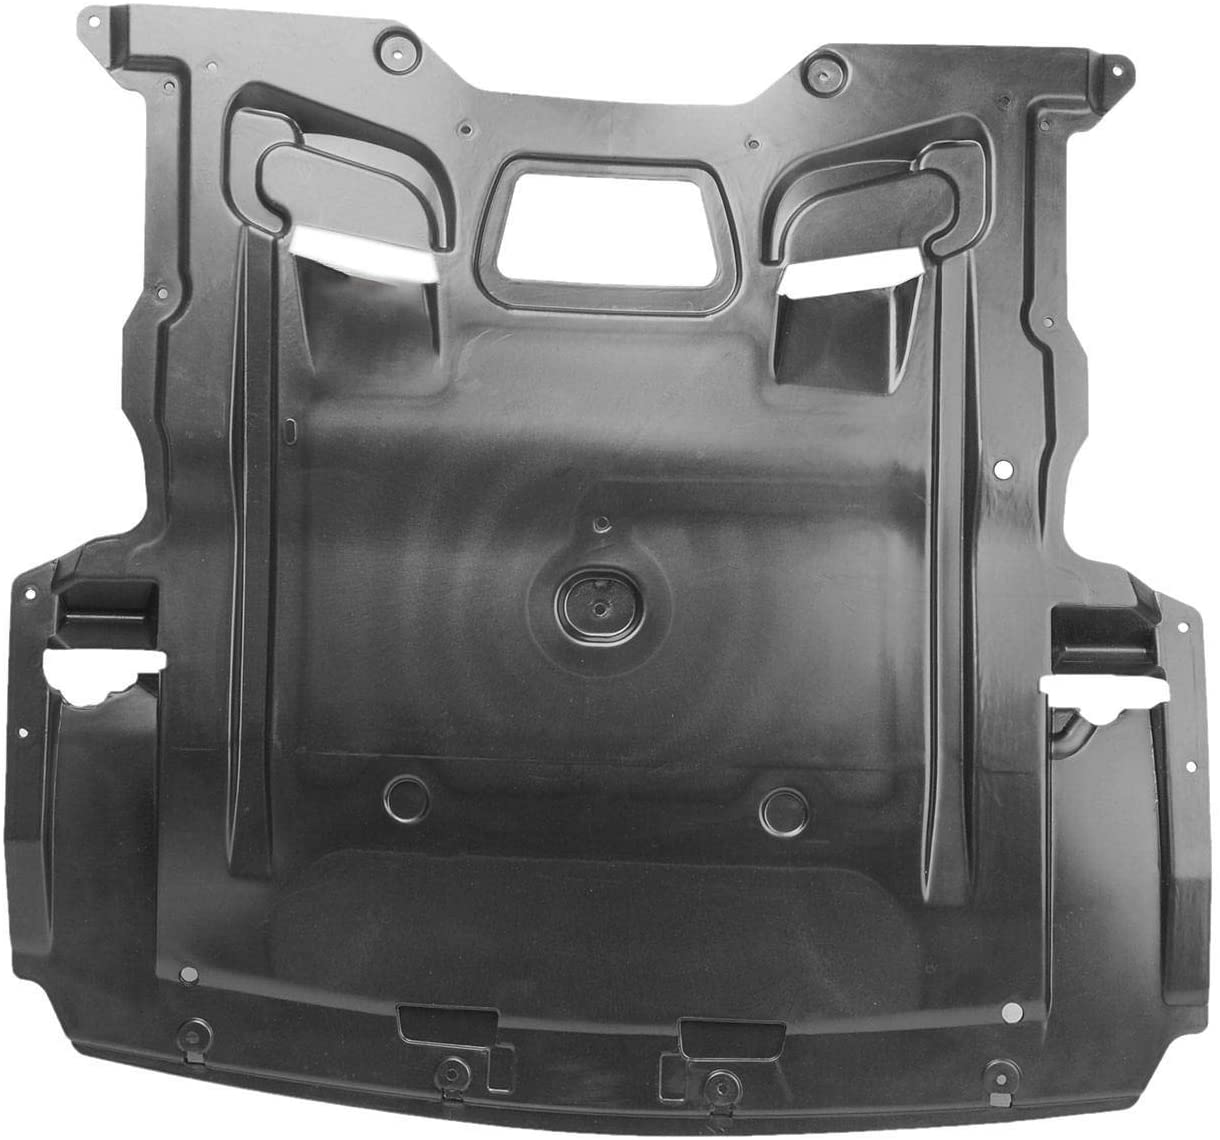 Aftermarket UNDER ENGINE COVERS for BMW - 535I, 535i,11-16,Lower engine cover